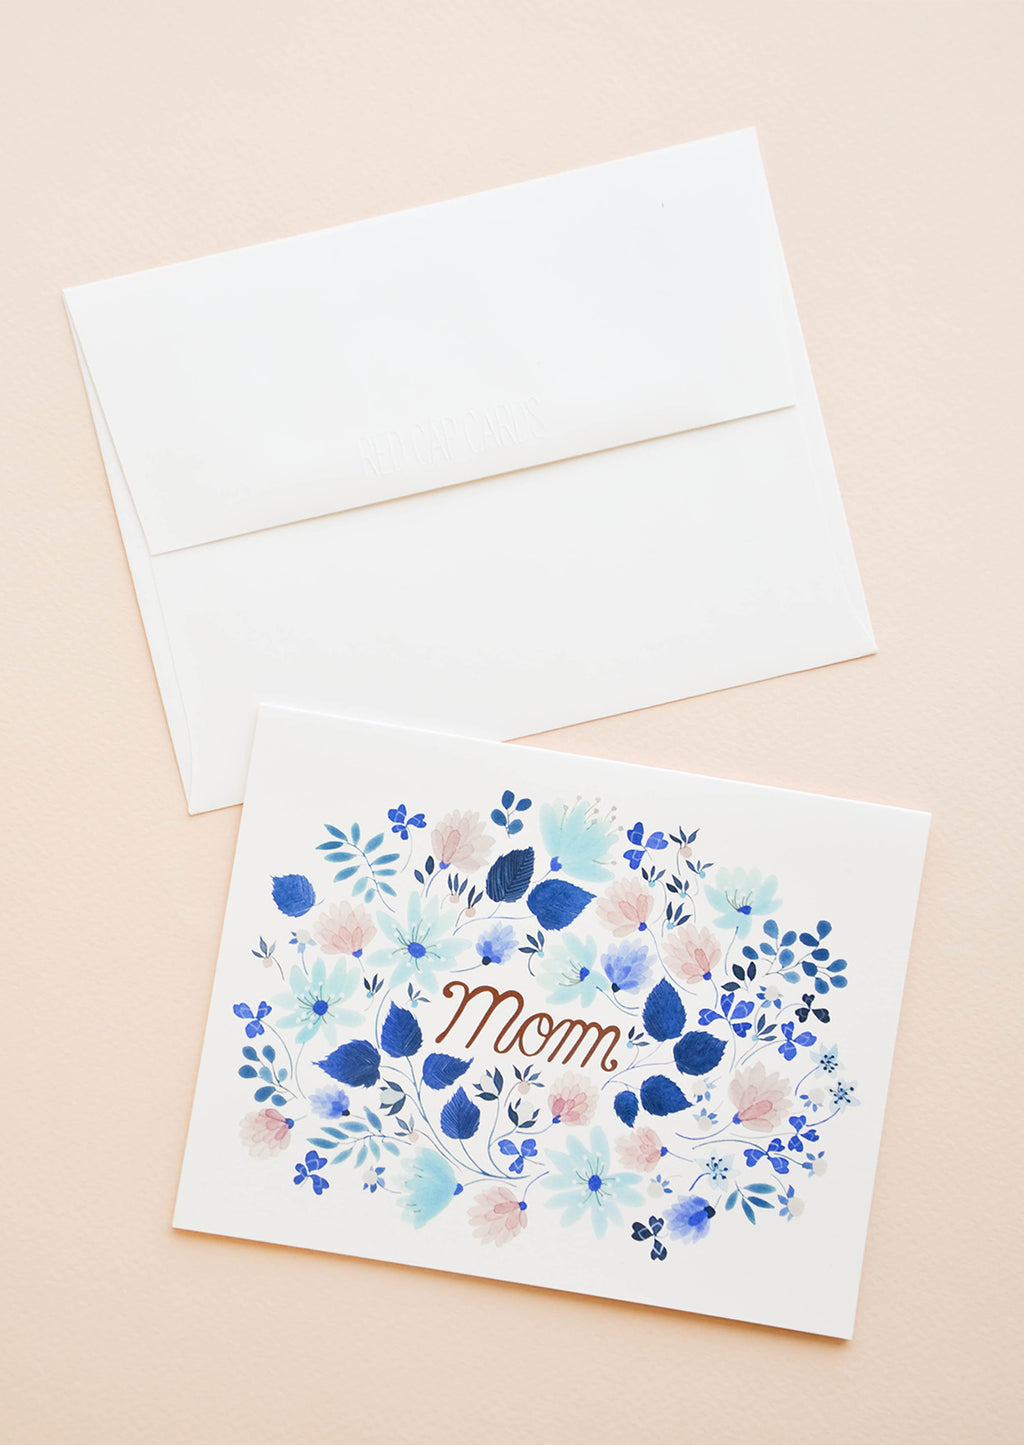 1: Greeting card with blue floral print frame around "Mom" printed in copper text